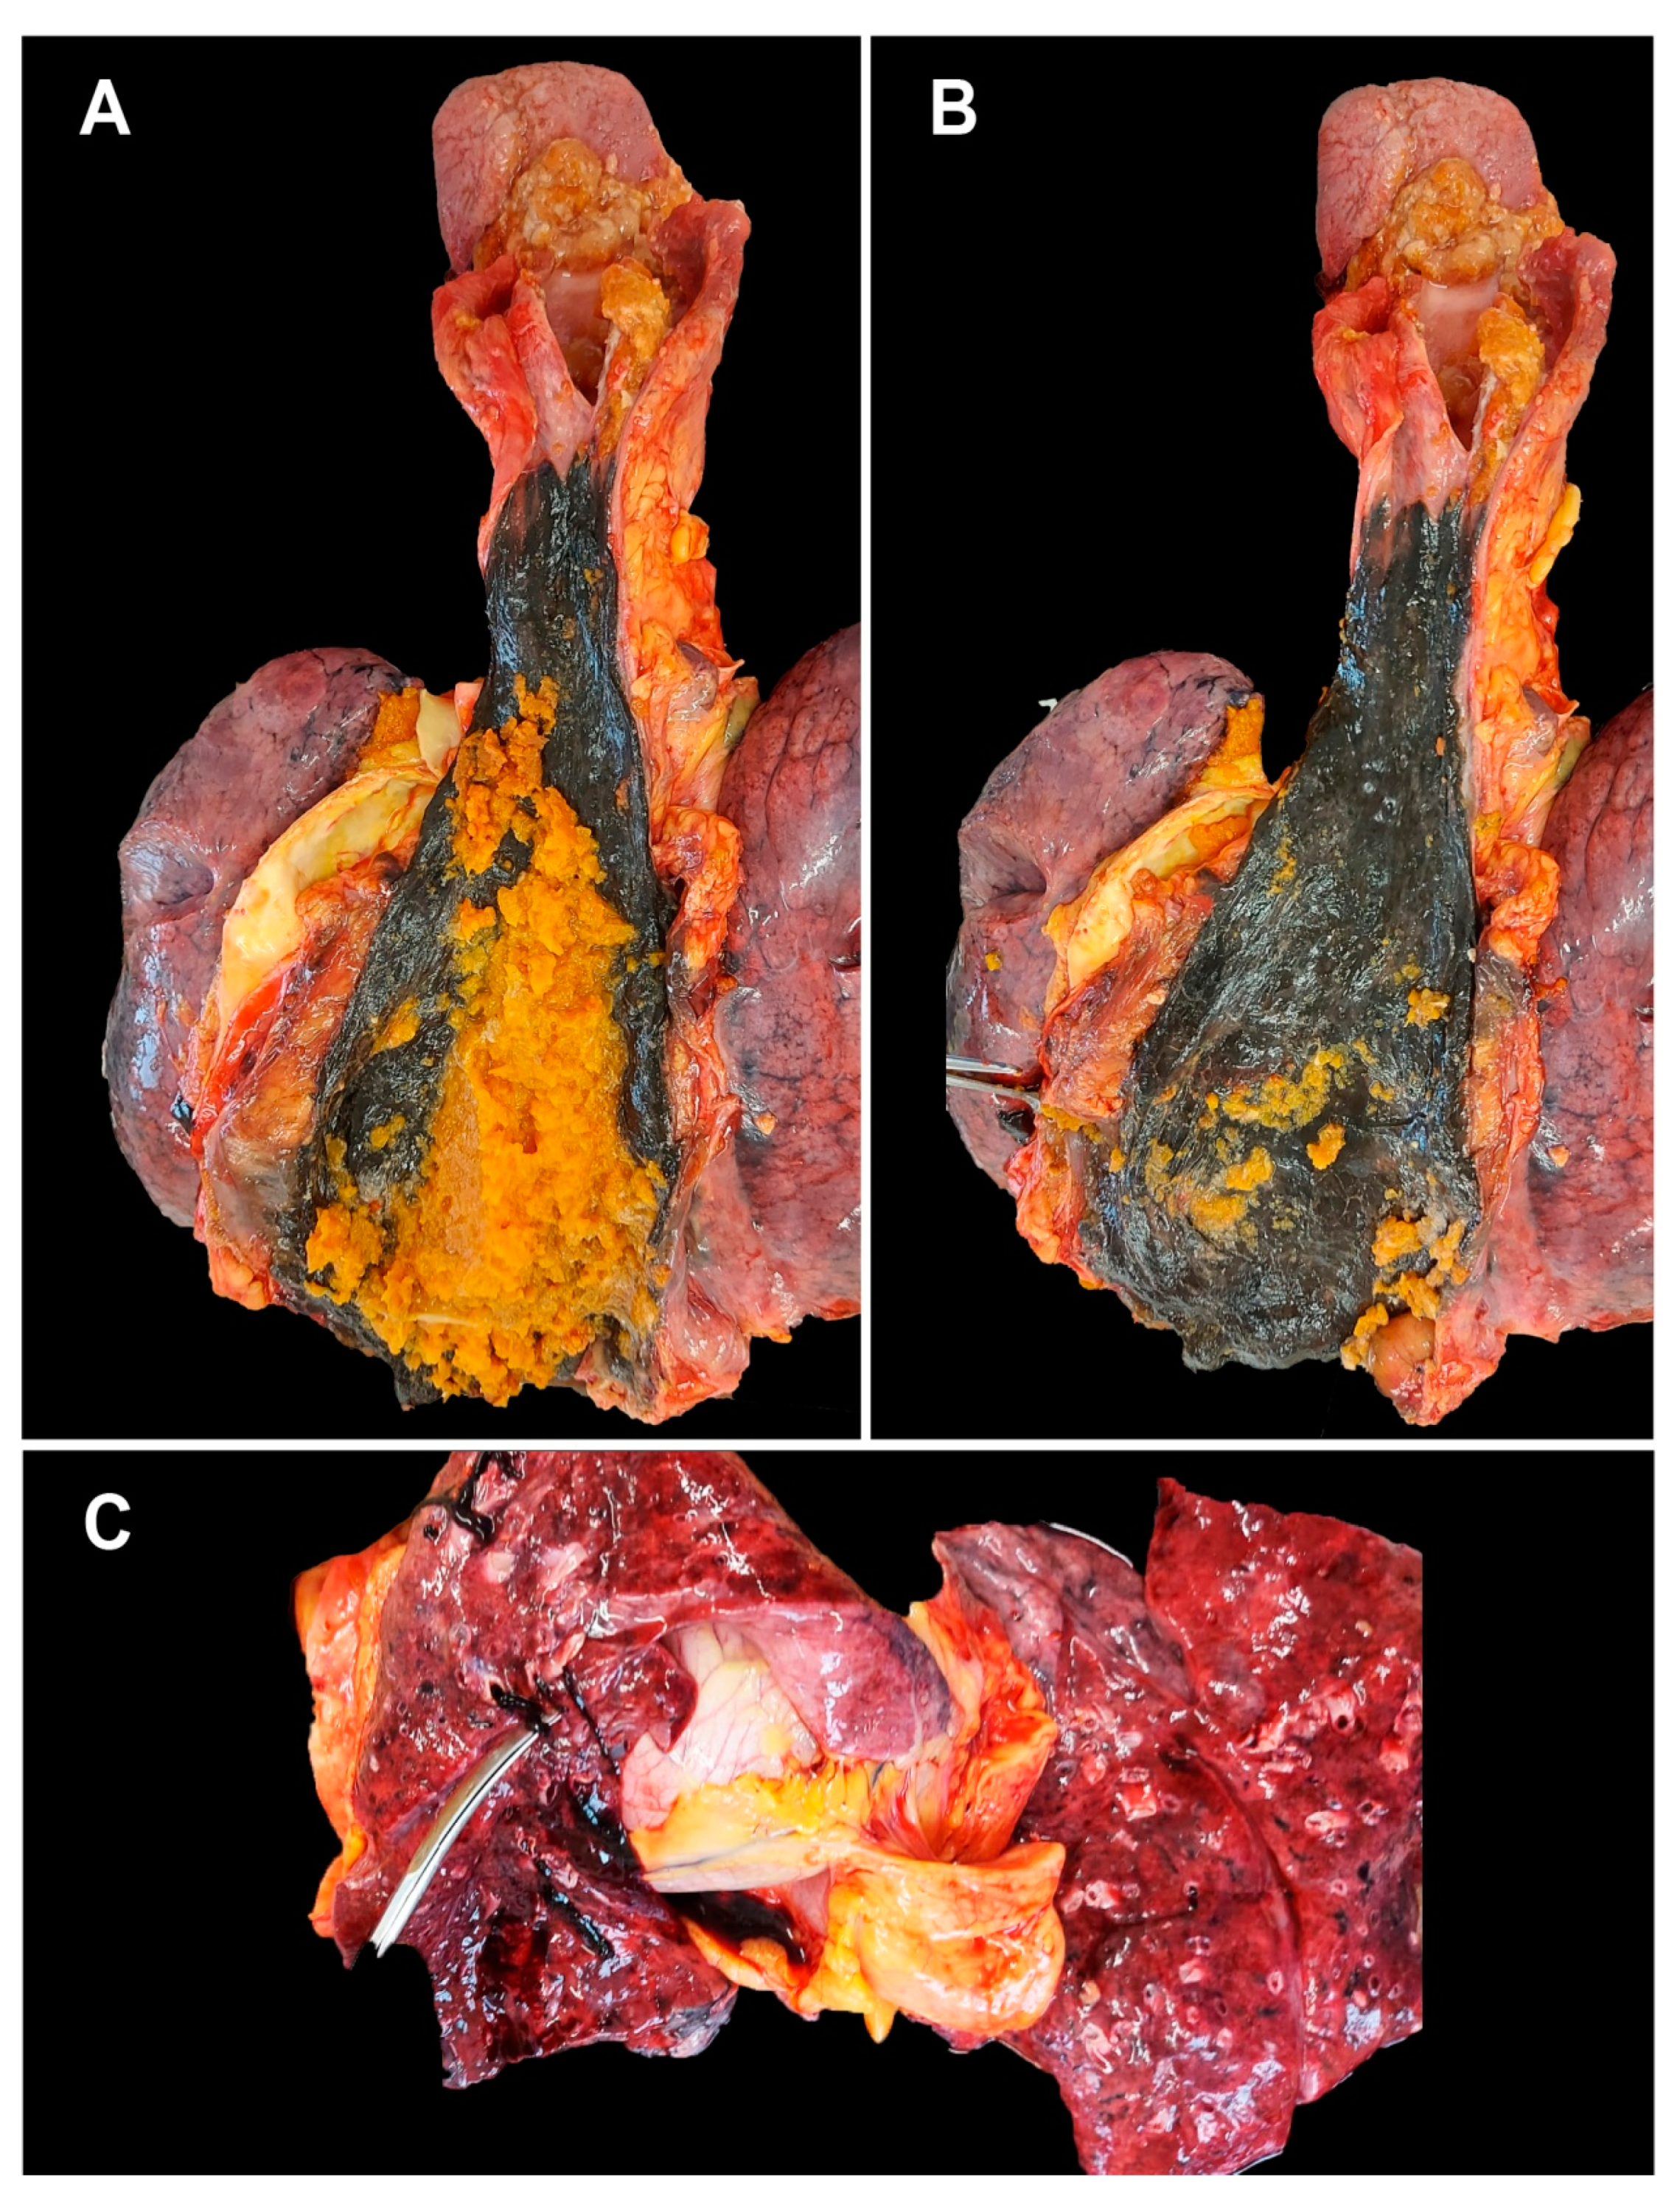 Medicina | Free Full-Text | Asymptomatic Esophageal Necrosis in a Patient  with Recent COVID-19: The First Case Diagnosed through Autopsy